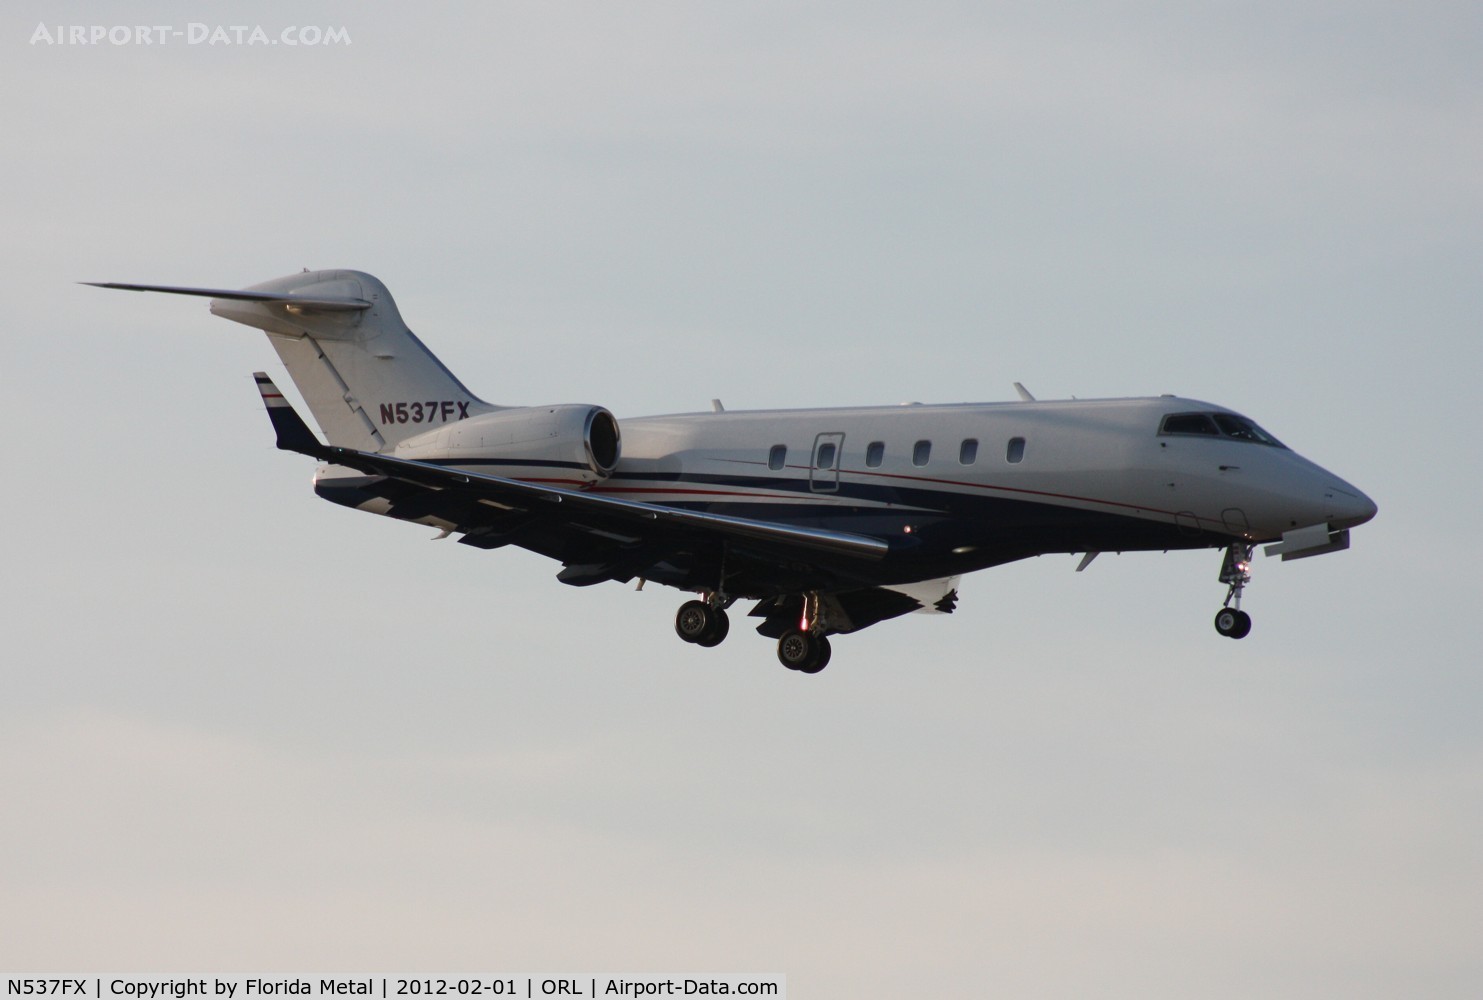 N537FX, 2007 Bombardier Challenger 300 (BD-100-1A10) C/N 20187, Challenger 300